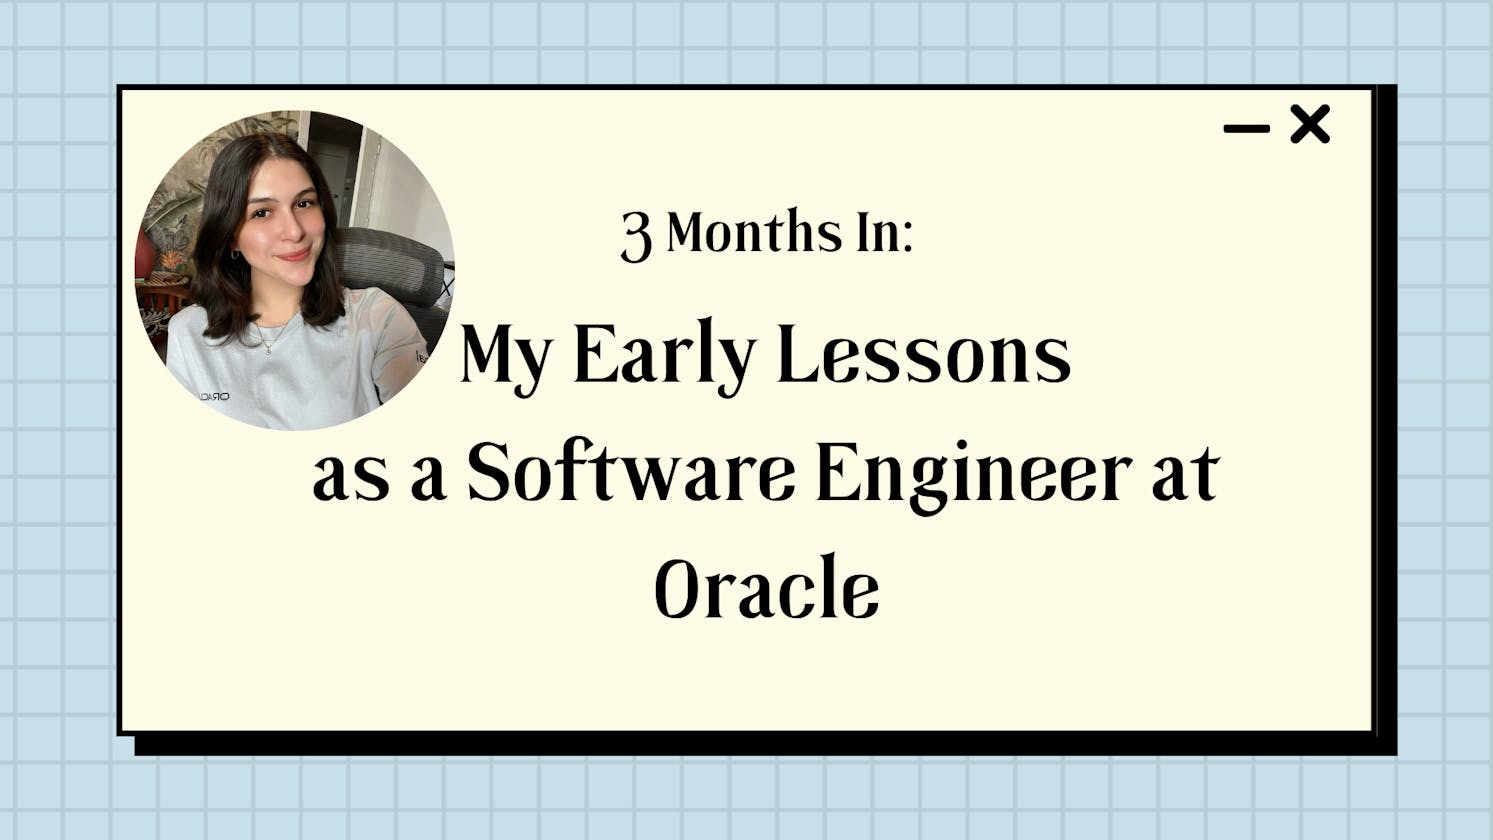 Cover Image for 3 Months In: My Early Lessons as a Software Engineer at Oracle